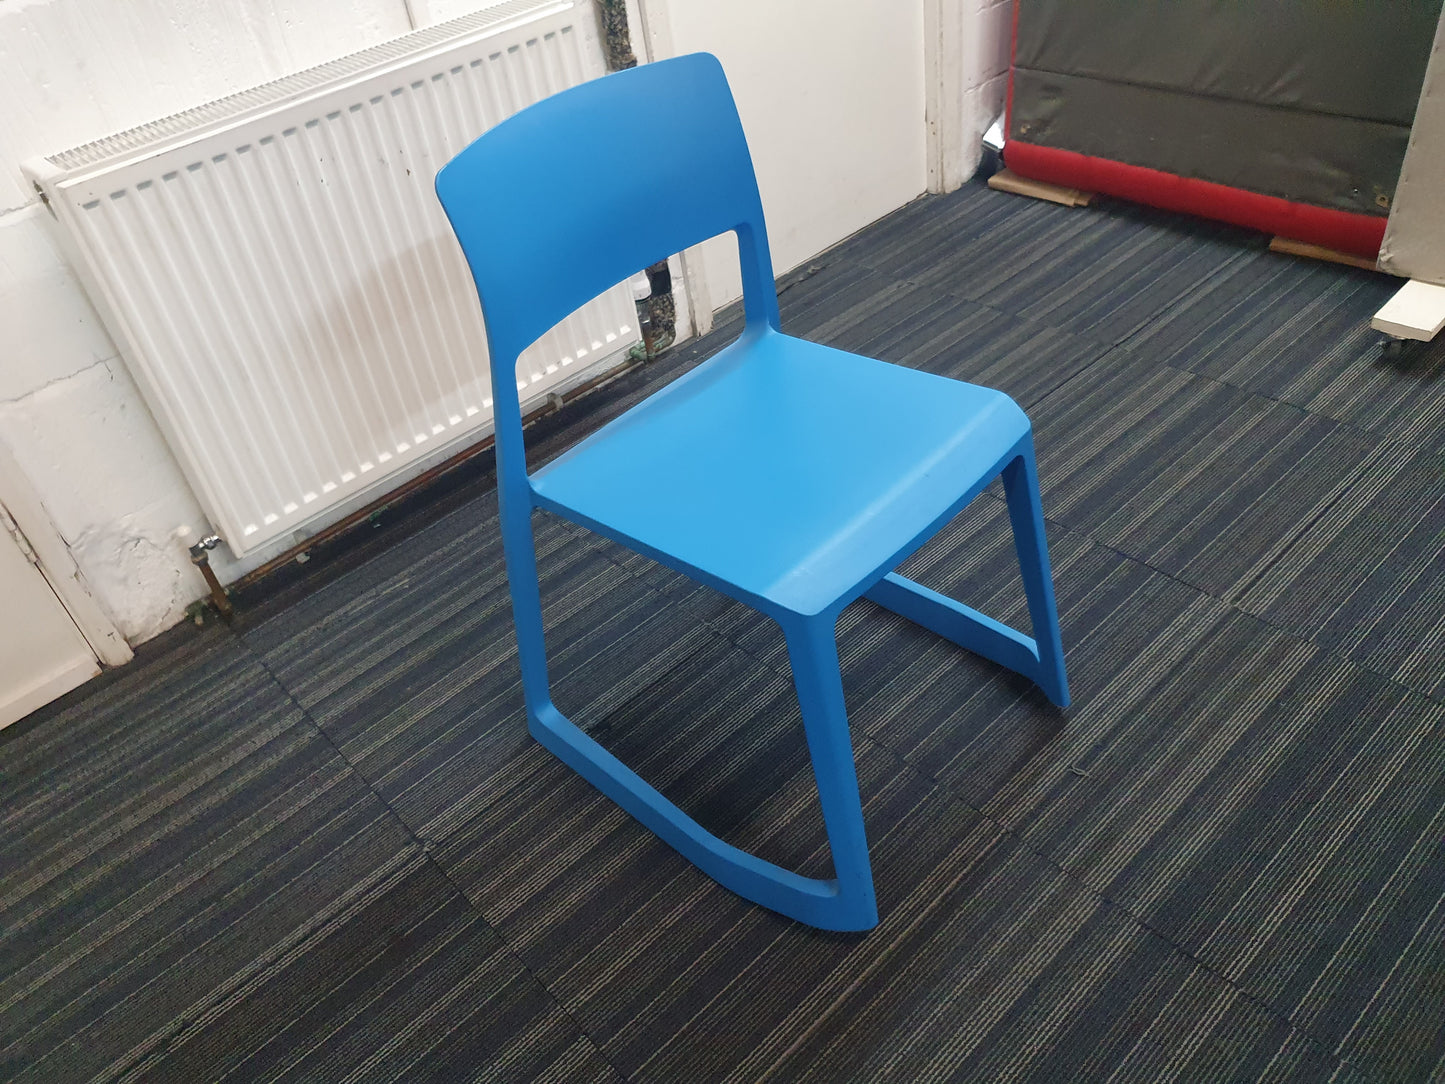 Blue cantilever chair on carpet